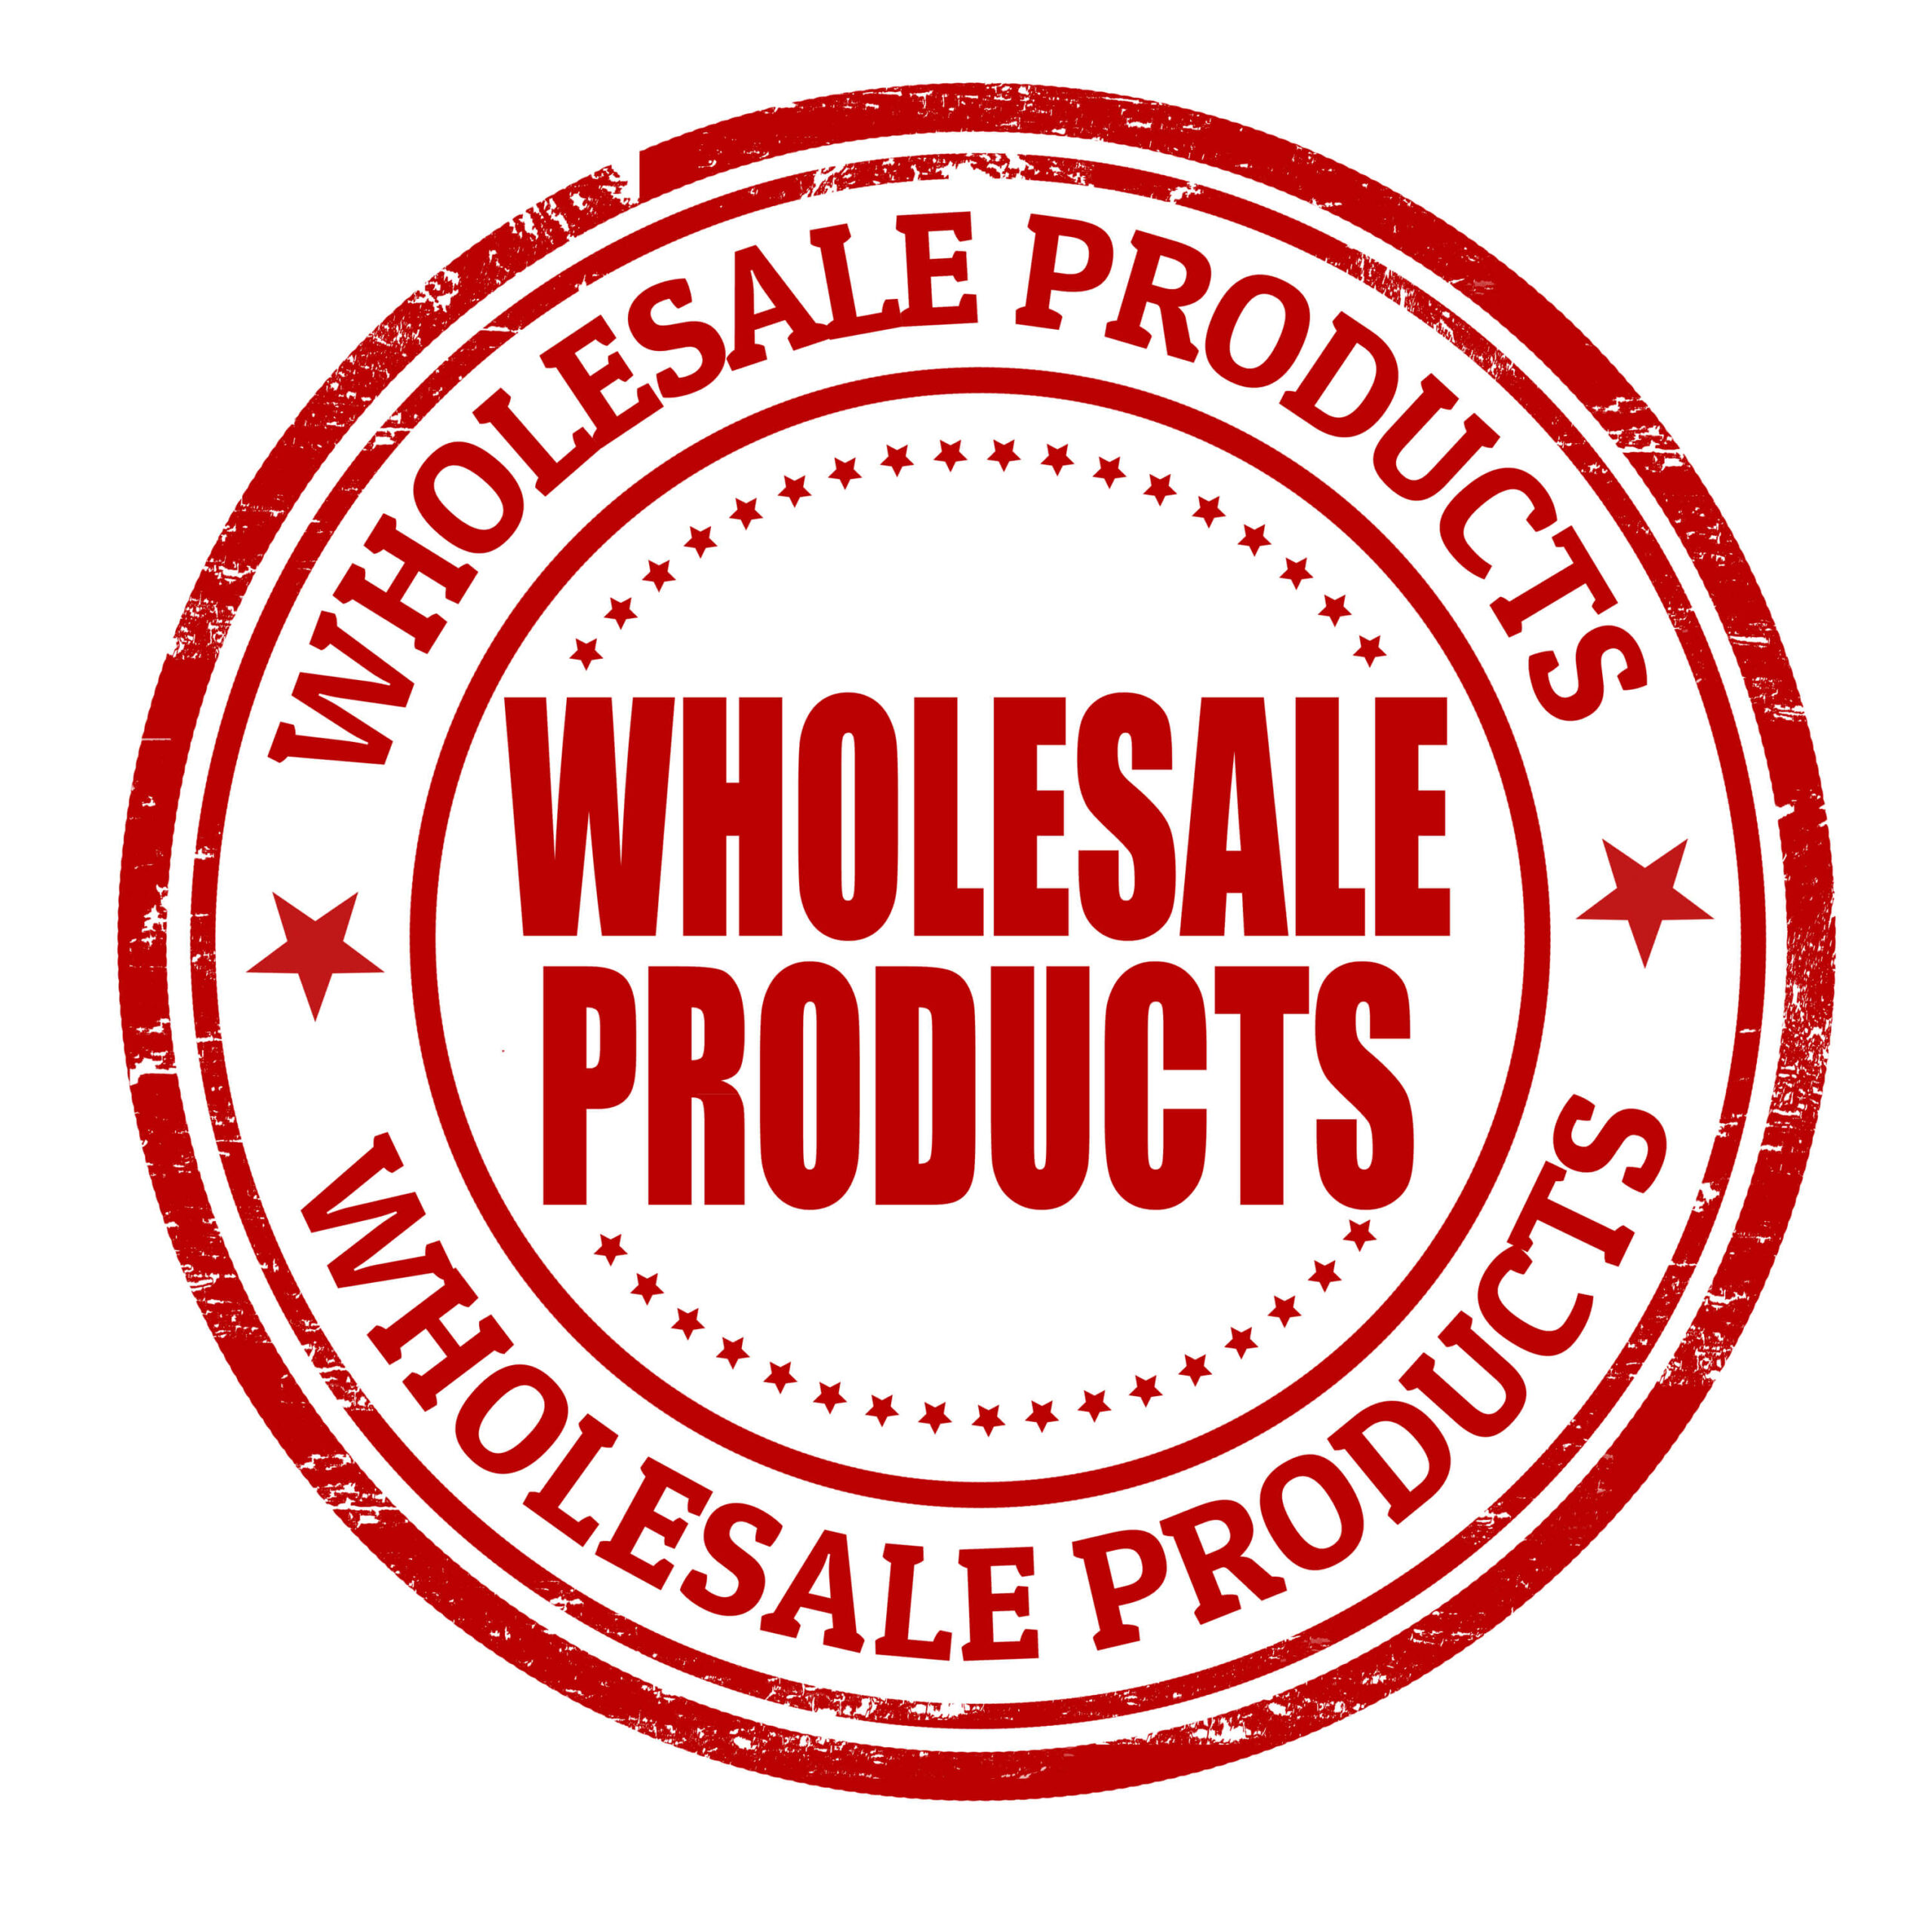 Wholesale products stamp